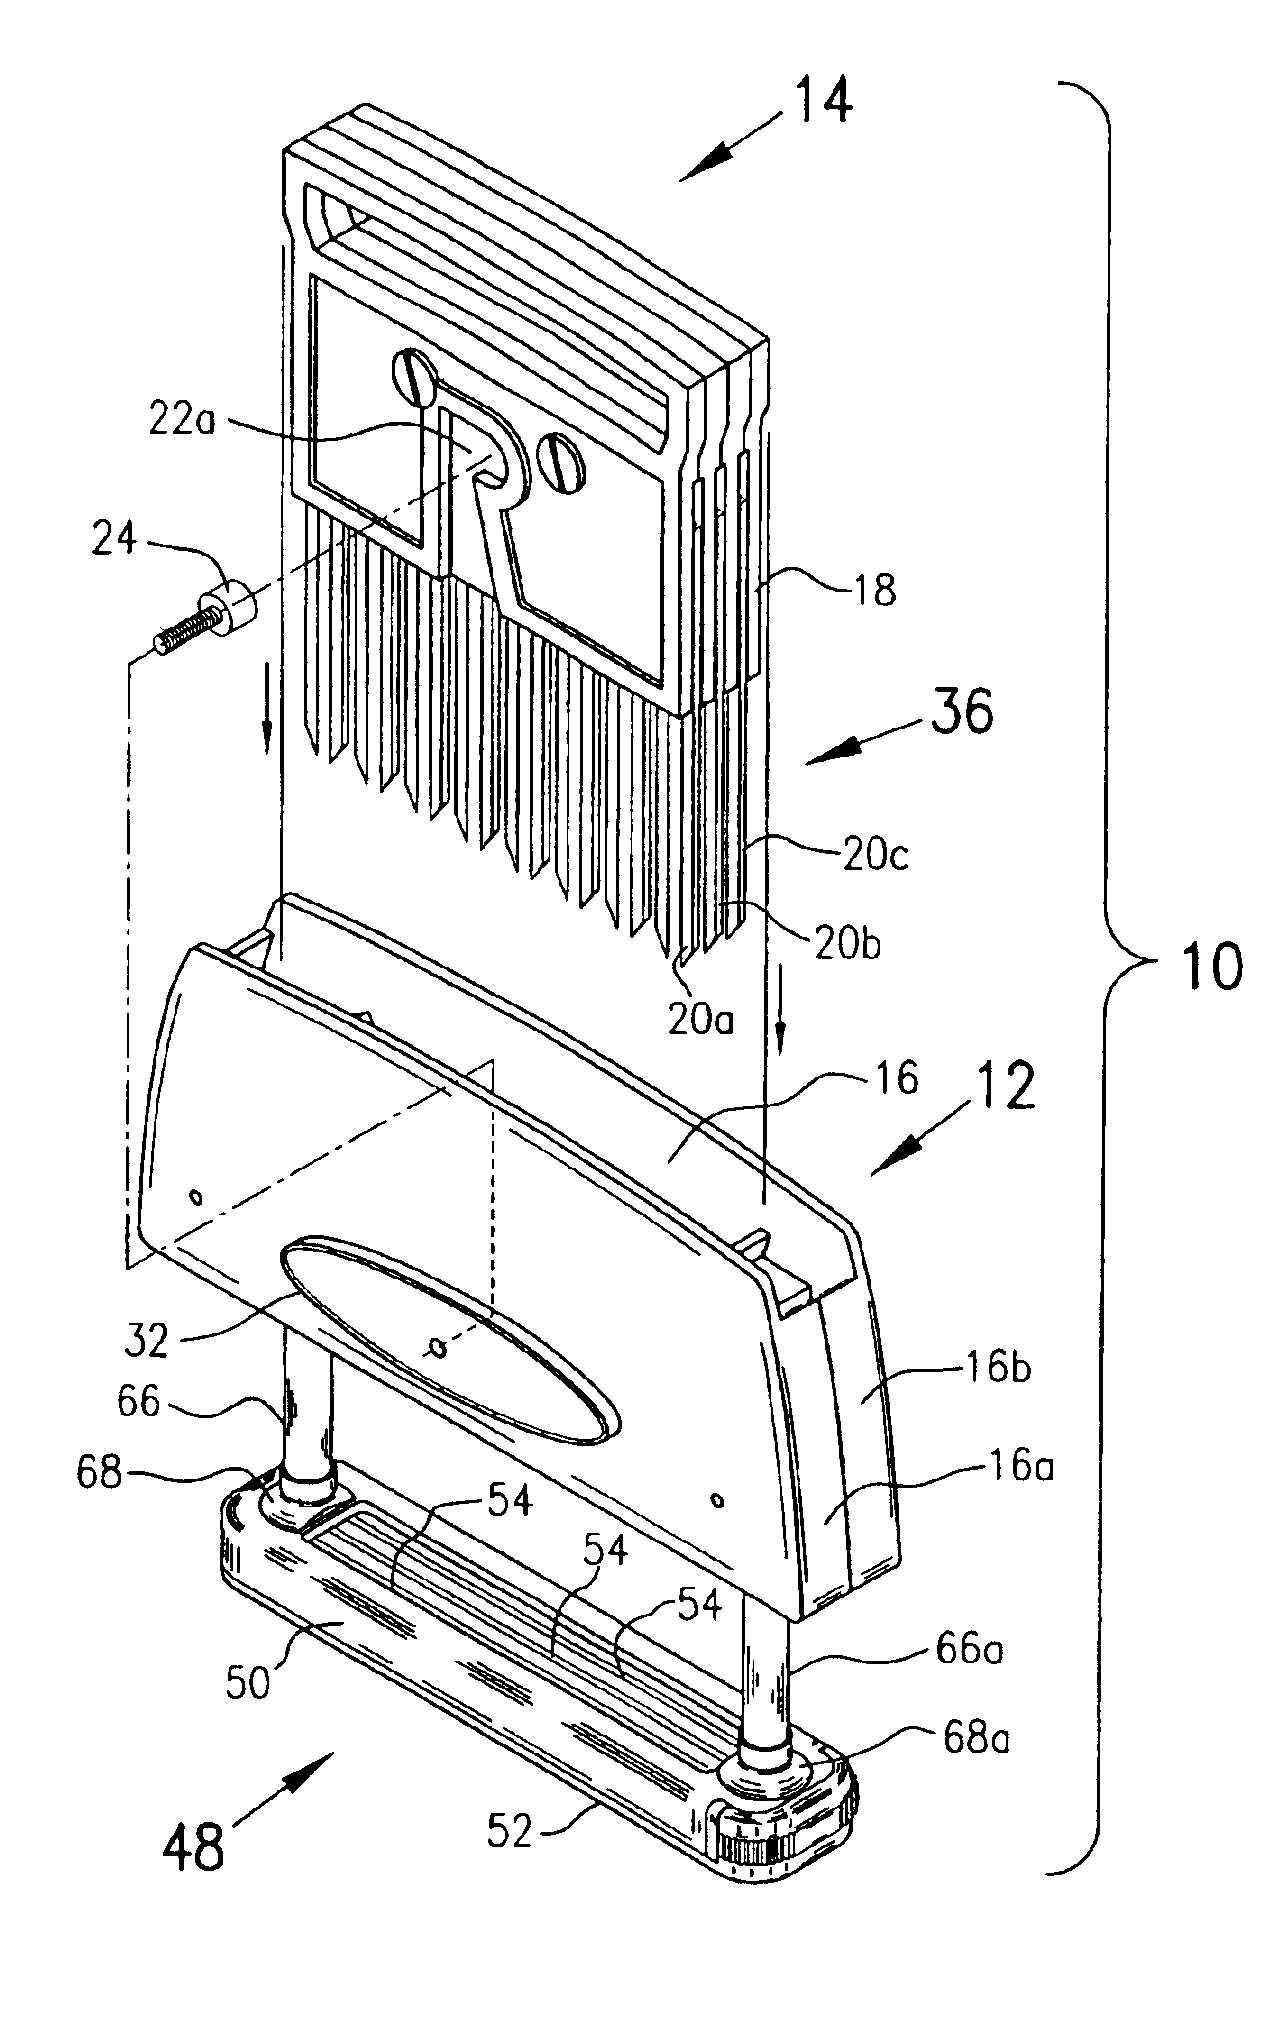 Food processor with removable blade cartridge